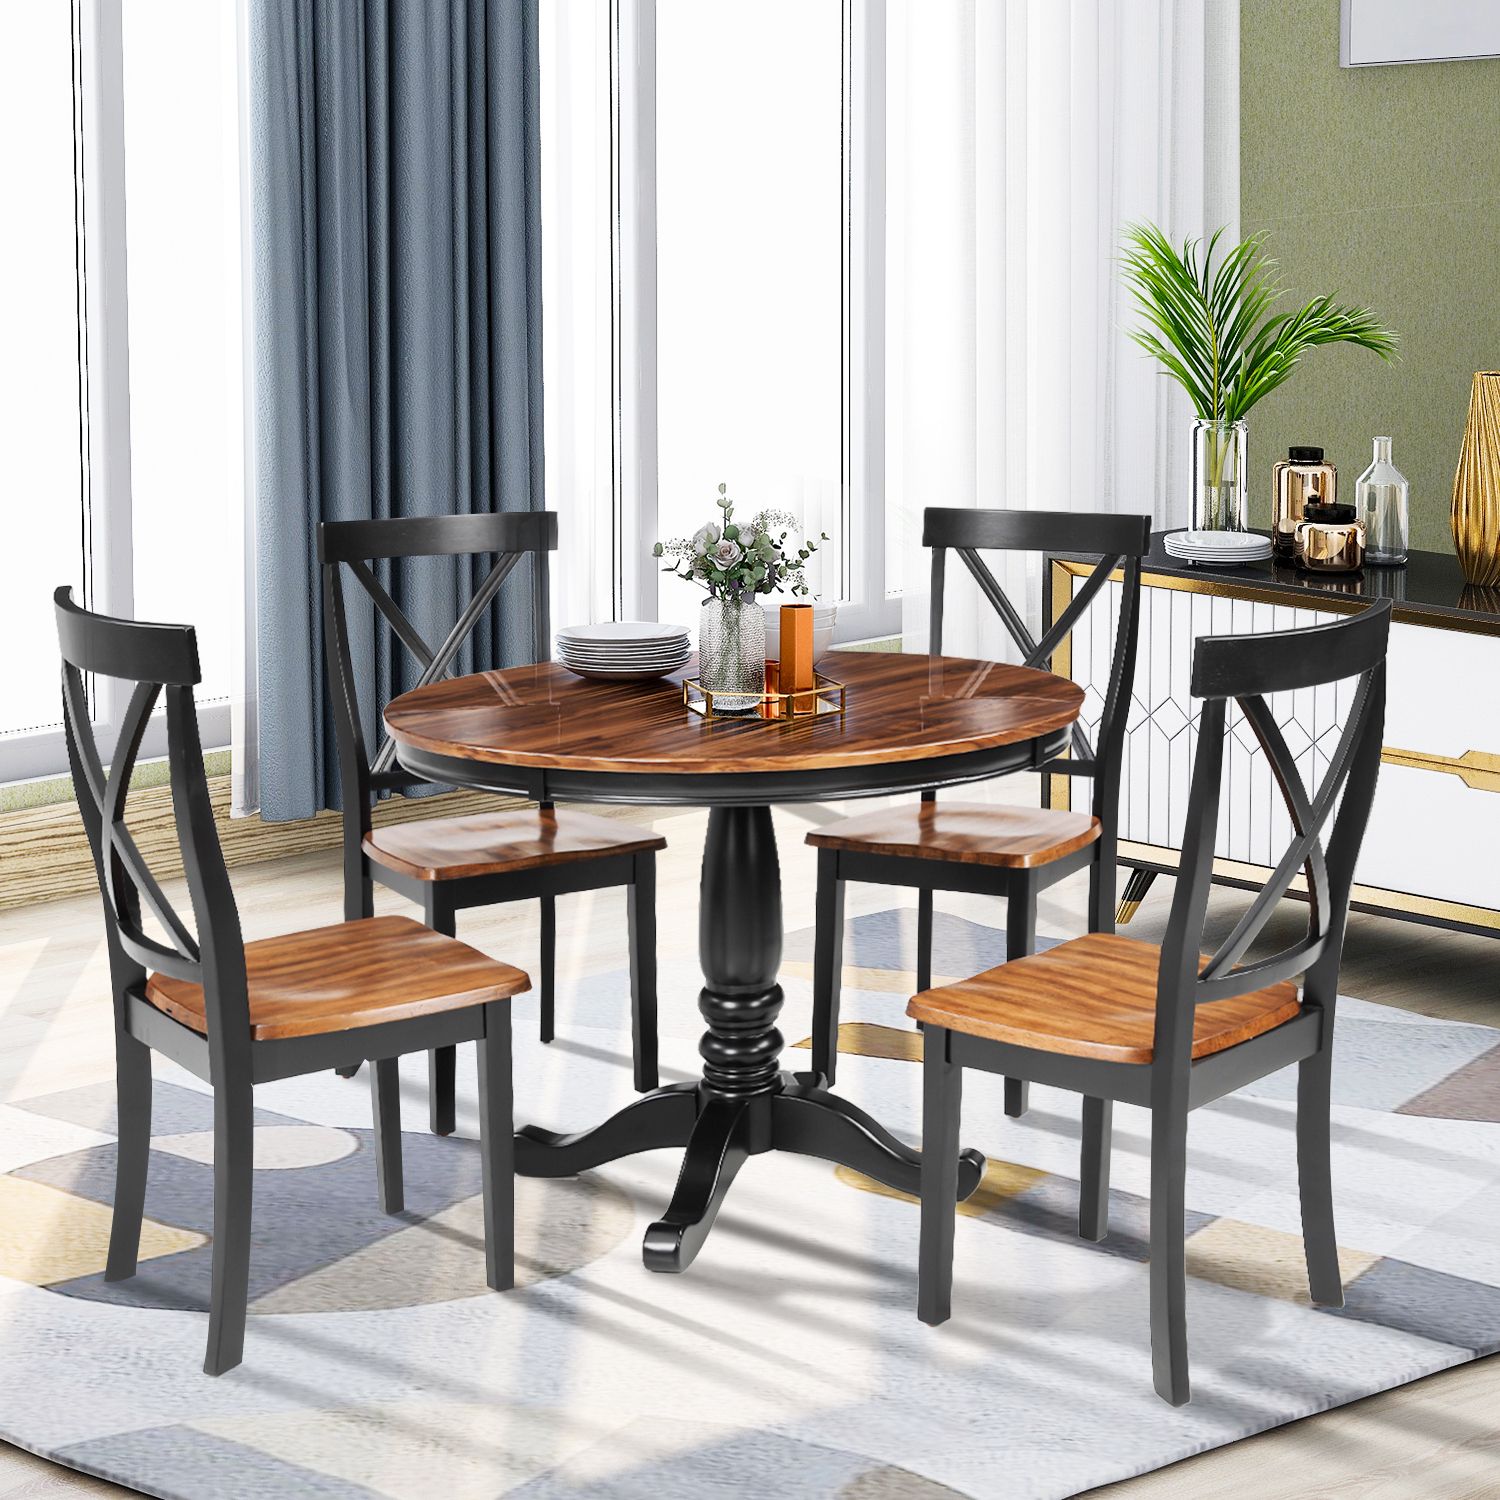 5 Piece Round Dining Sets With Current Round Dining Room Table Set For 4 Persons, 5 Piece Dining Room Table (View 13 of 15)